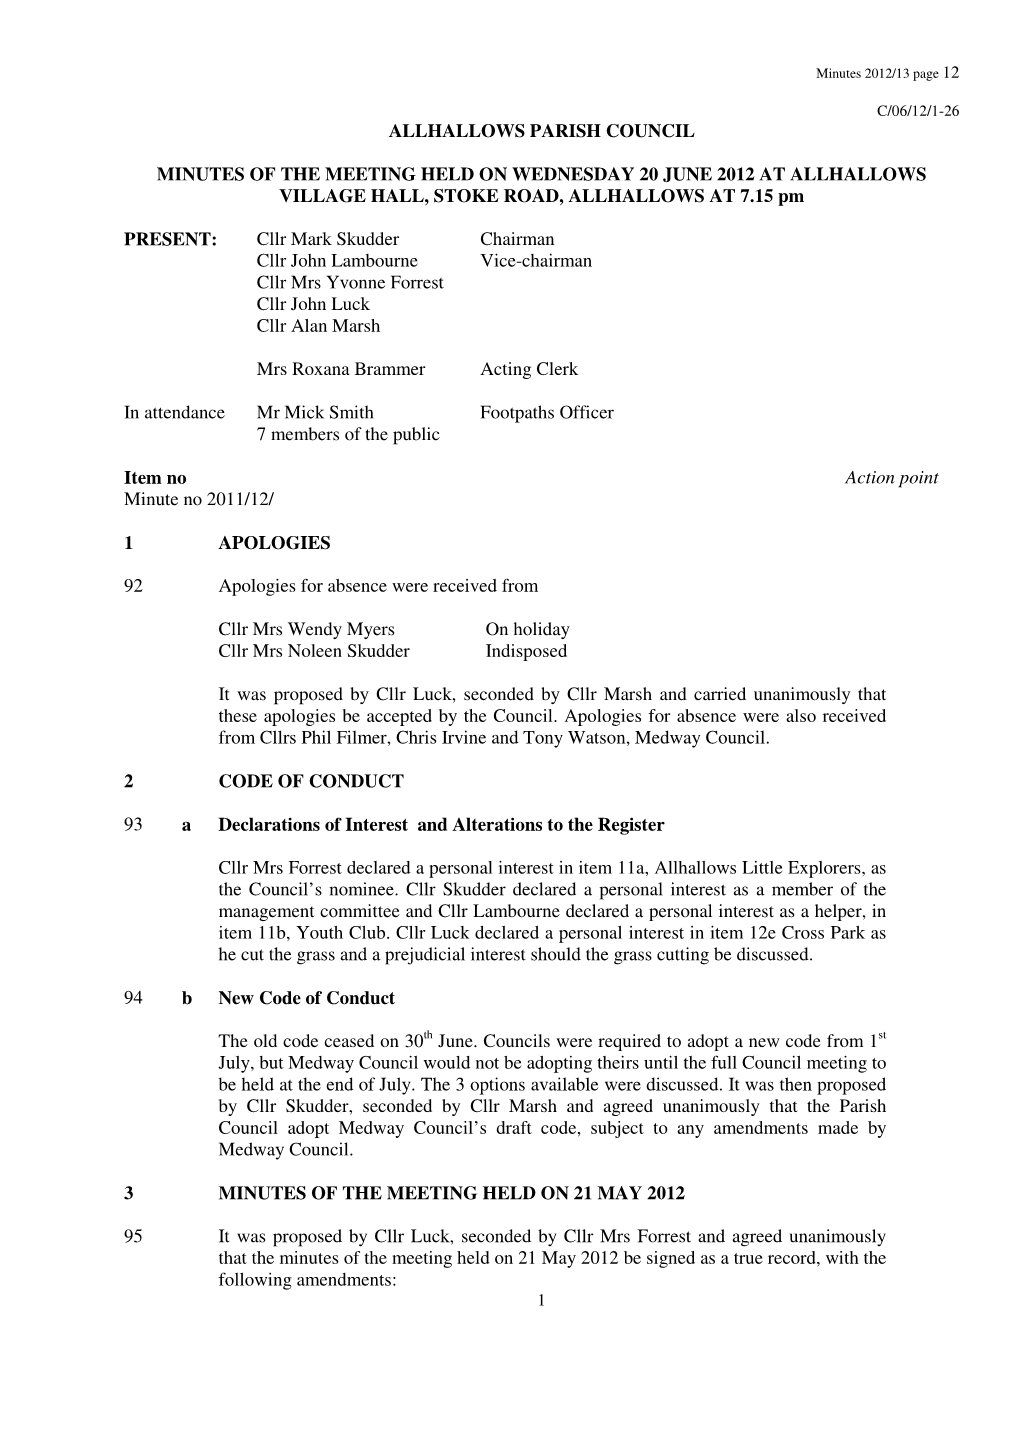 Allhallows Parish Council Minutes of the Meeting Held